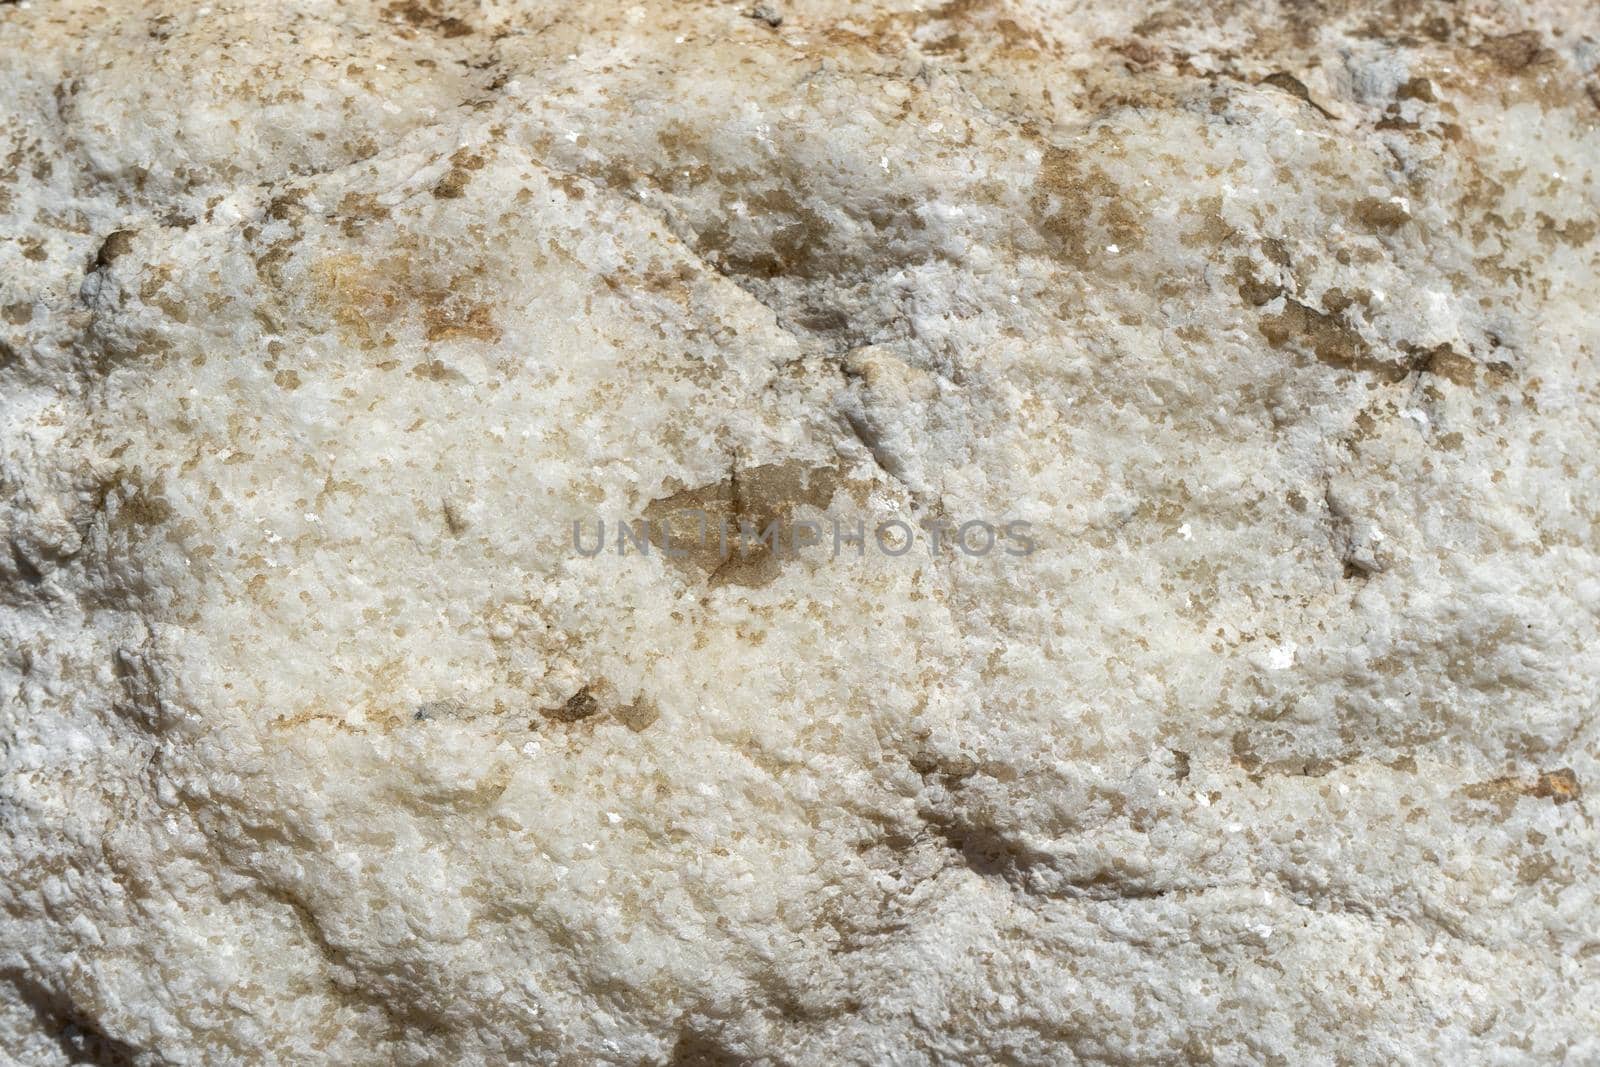 Natural background of light marble with a non-uniform texture.